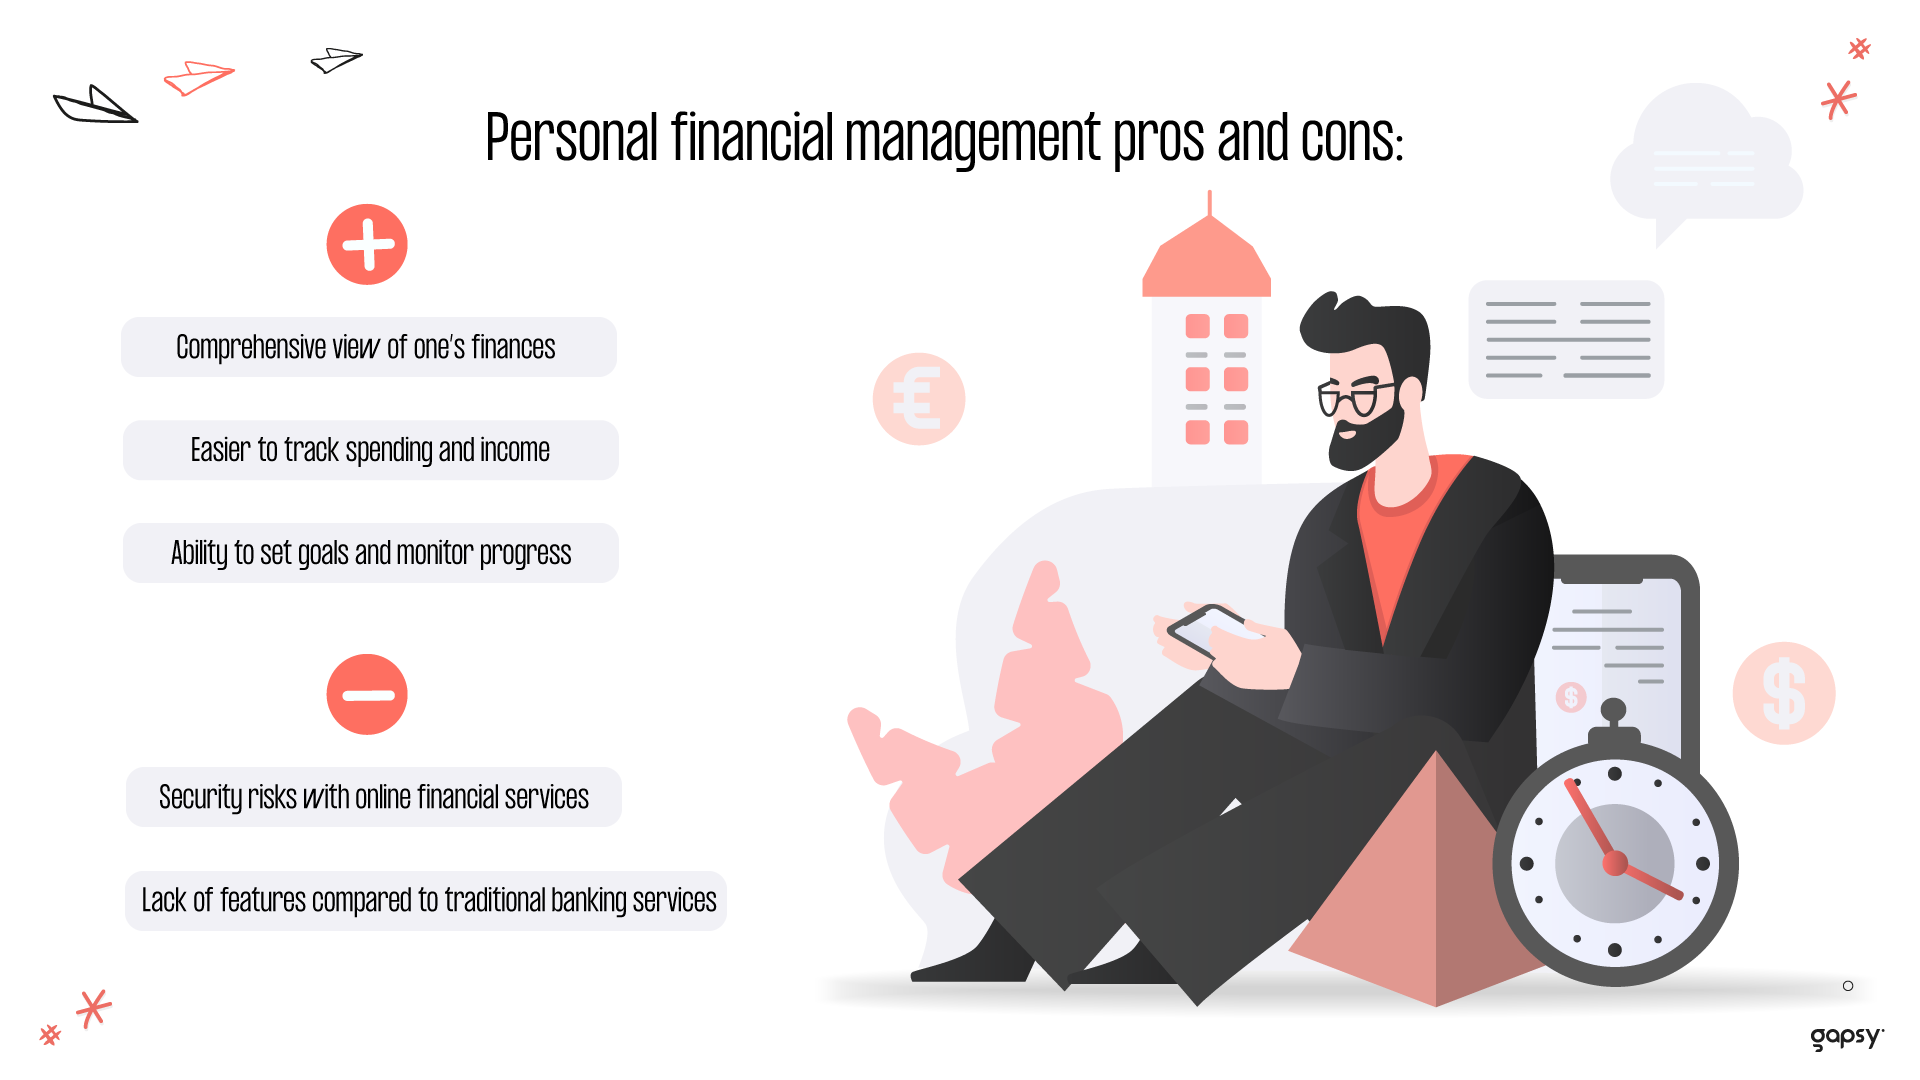 Personal financial management pros and cons